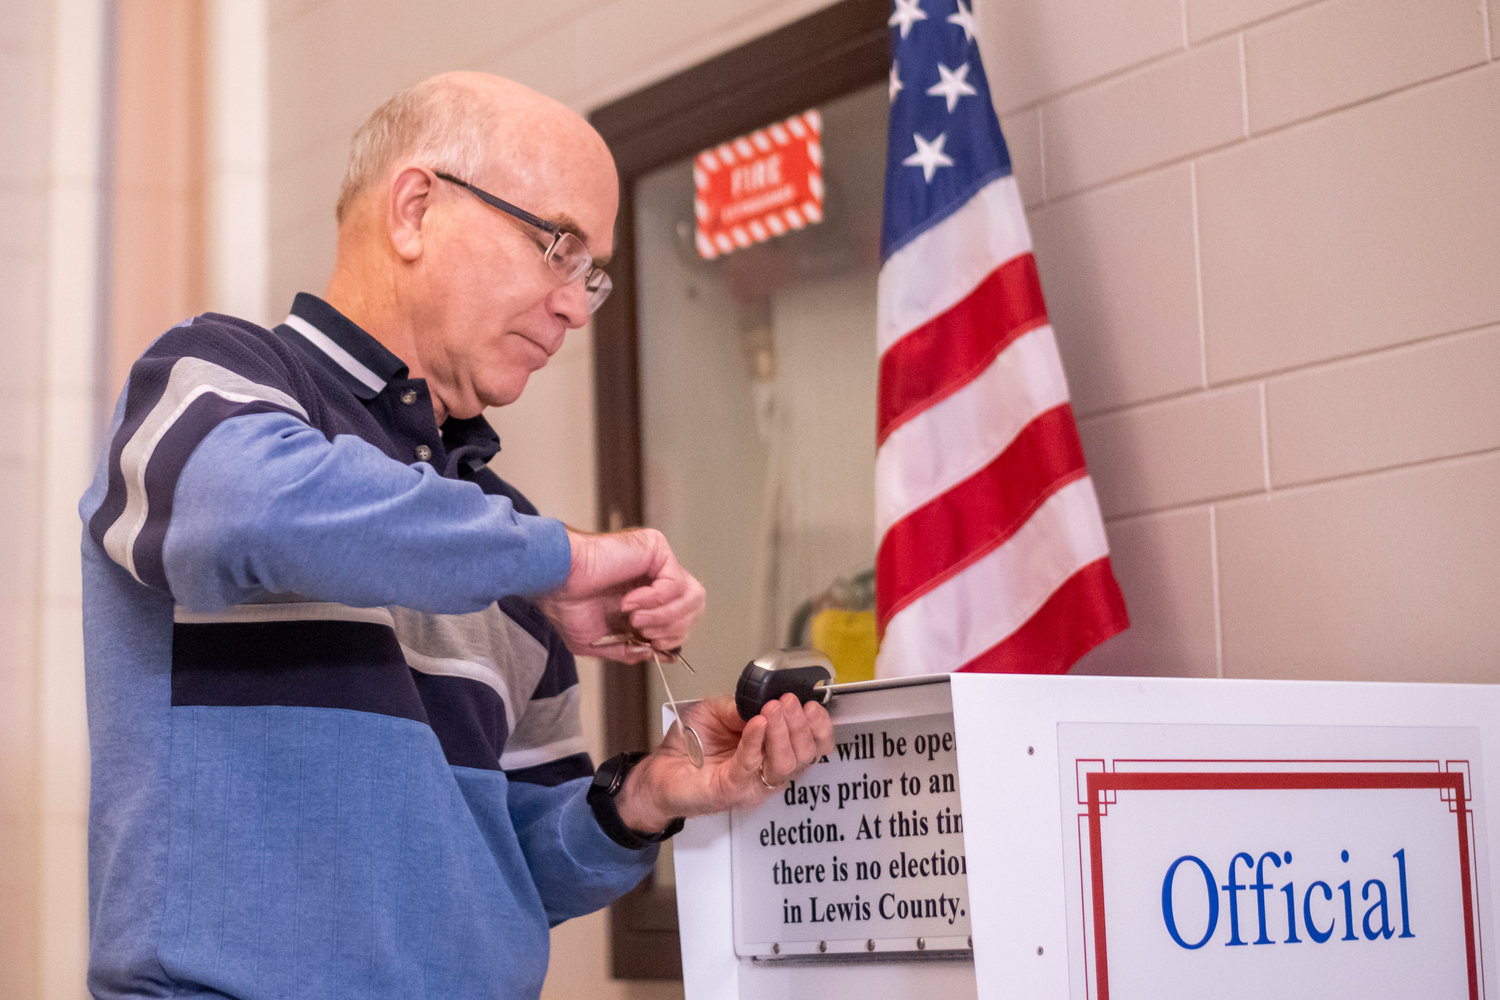 FILE PHOTO — Lewis County Auditor Larry Grove locks up an Official Ballot Box at the Lewis County Courthouse in Chehalis.